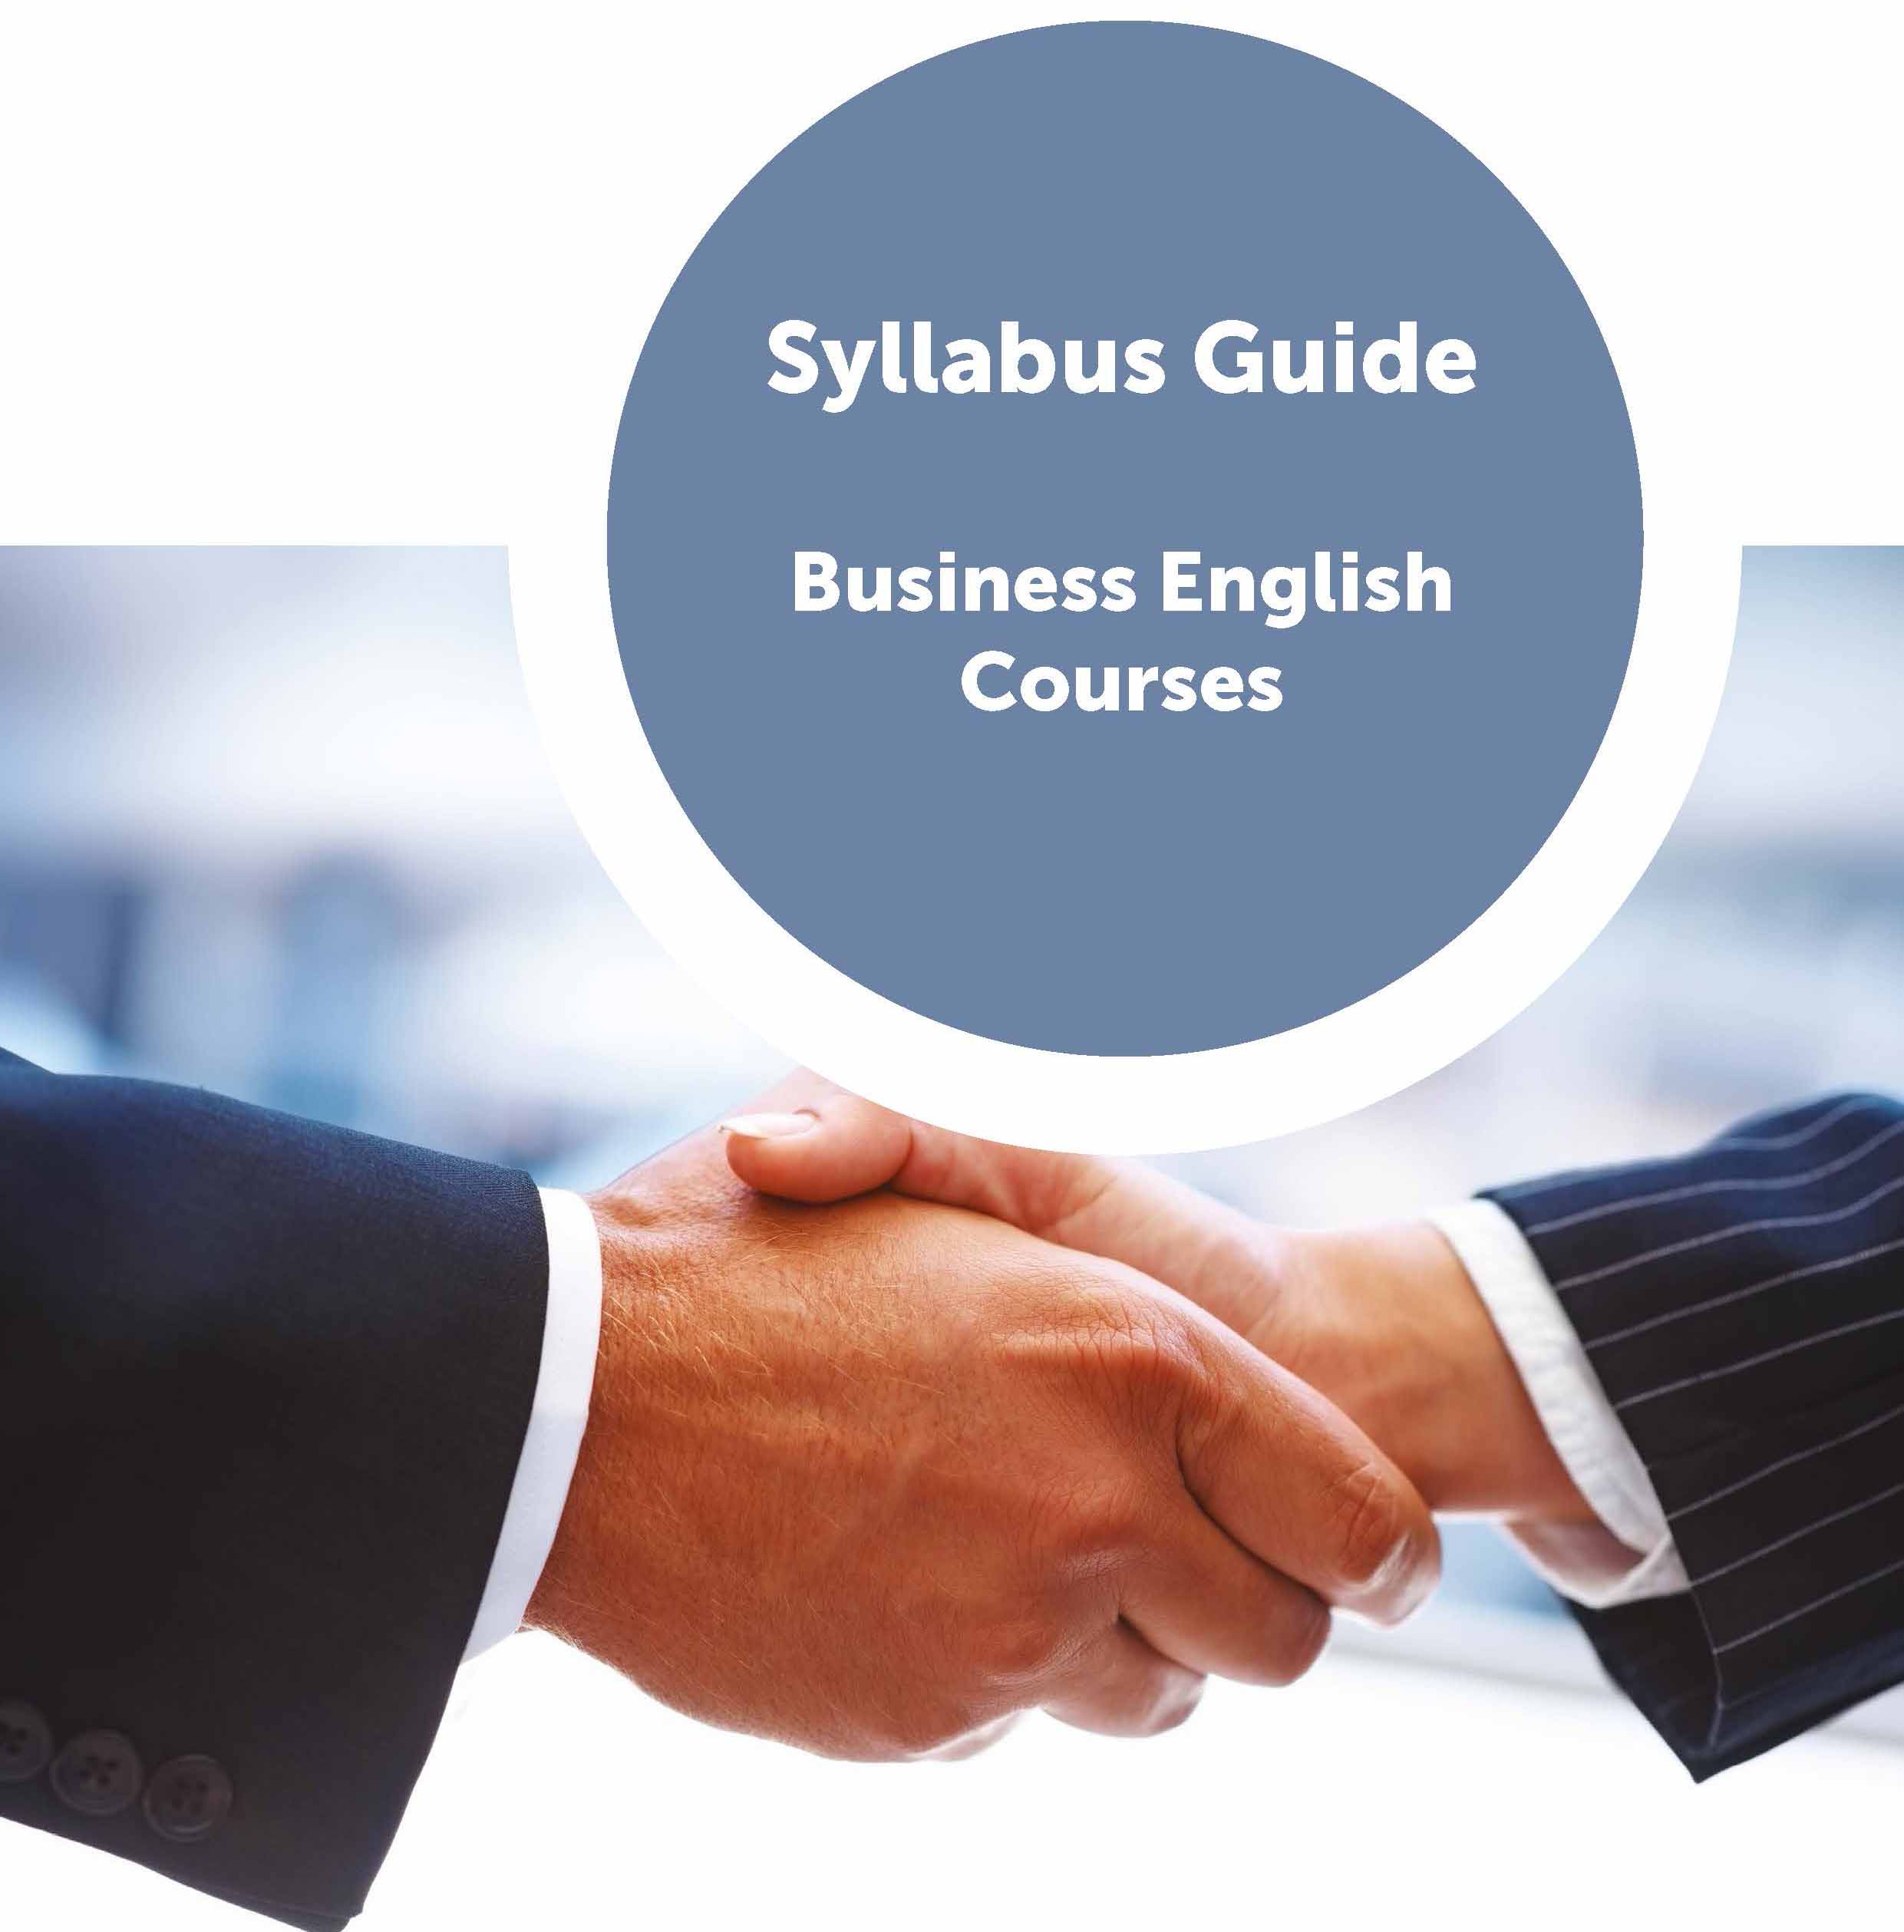 Syllabus Guide - Business English Courses